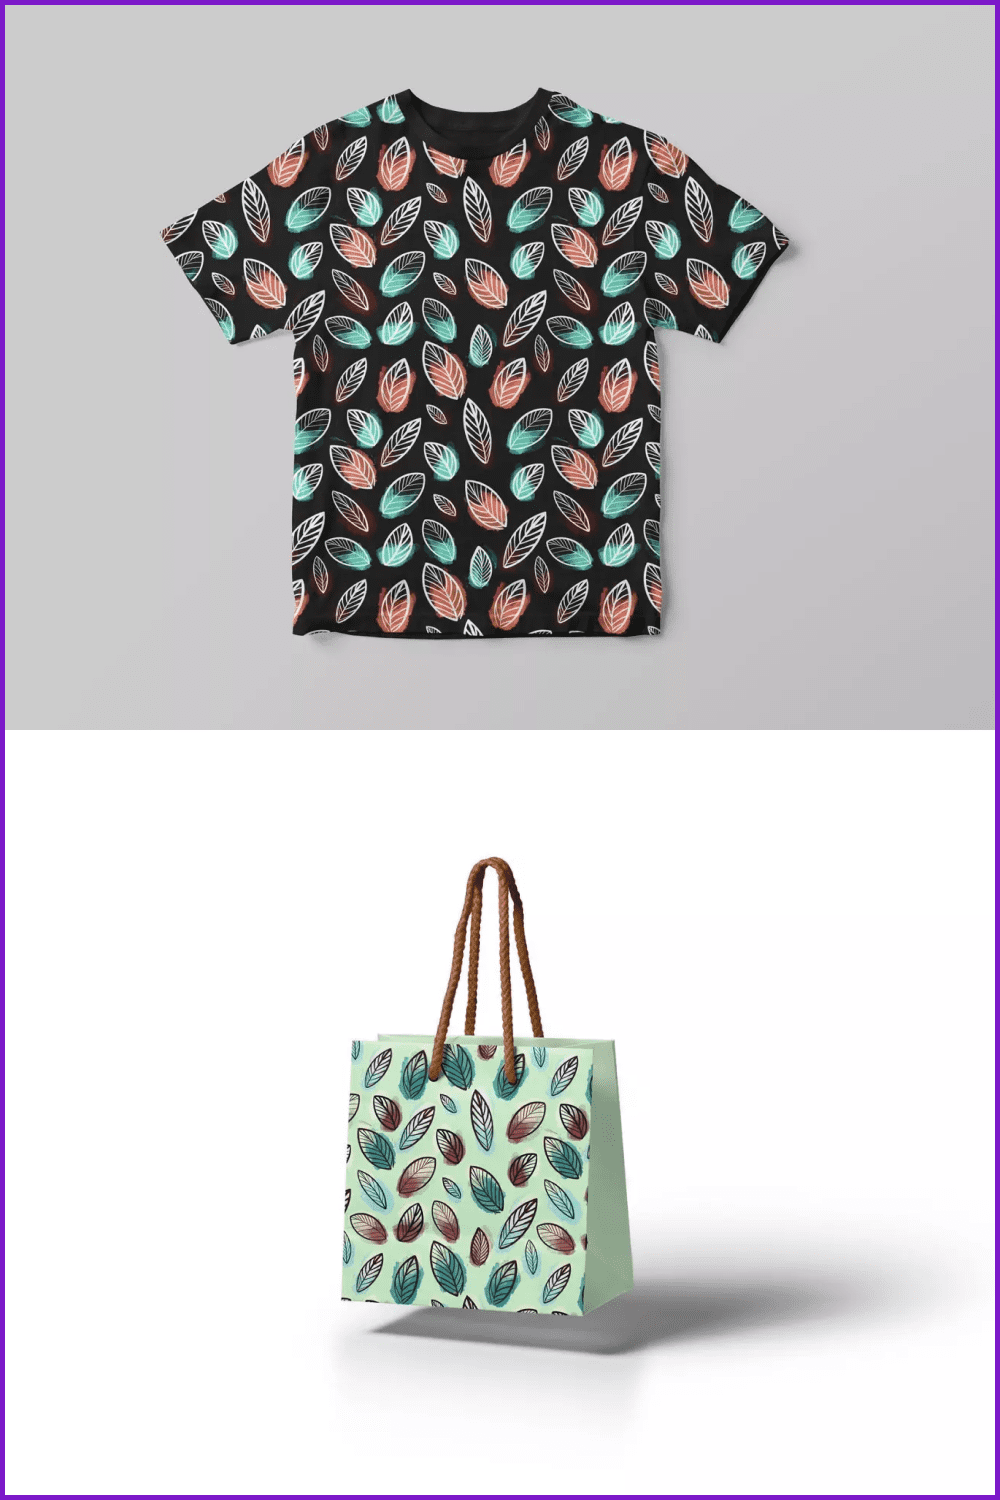 Black T-shirt and eco bag with leaves.